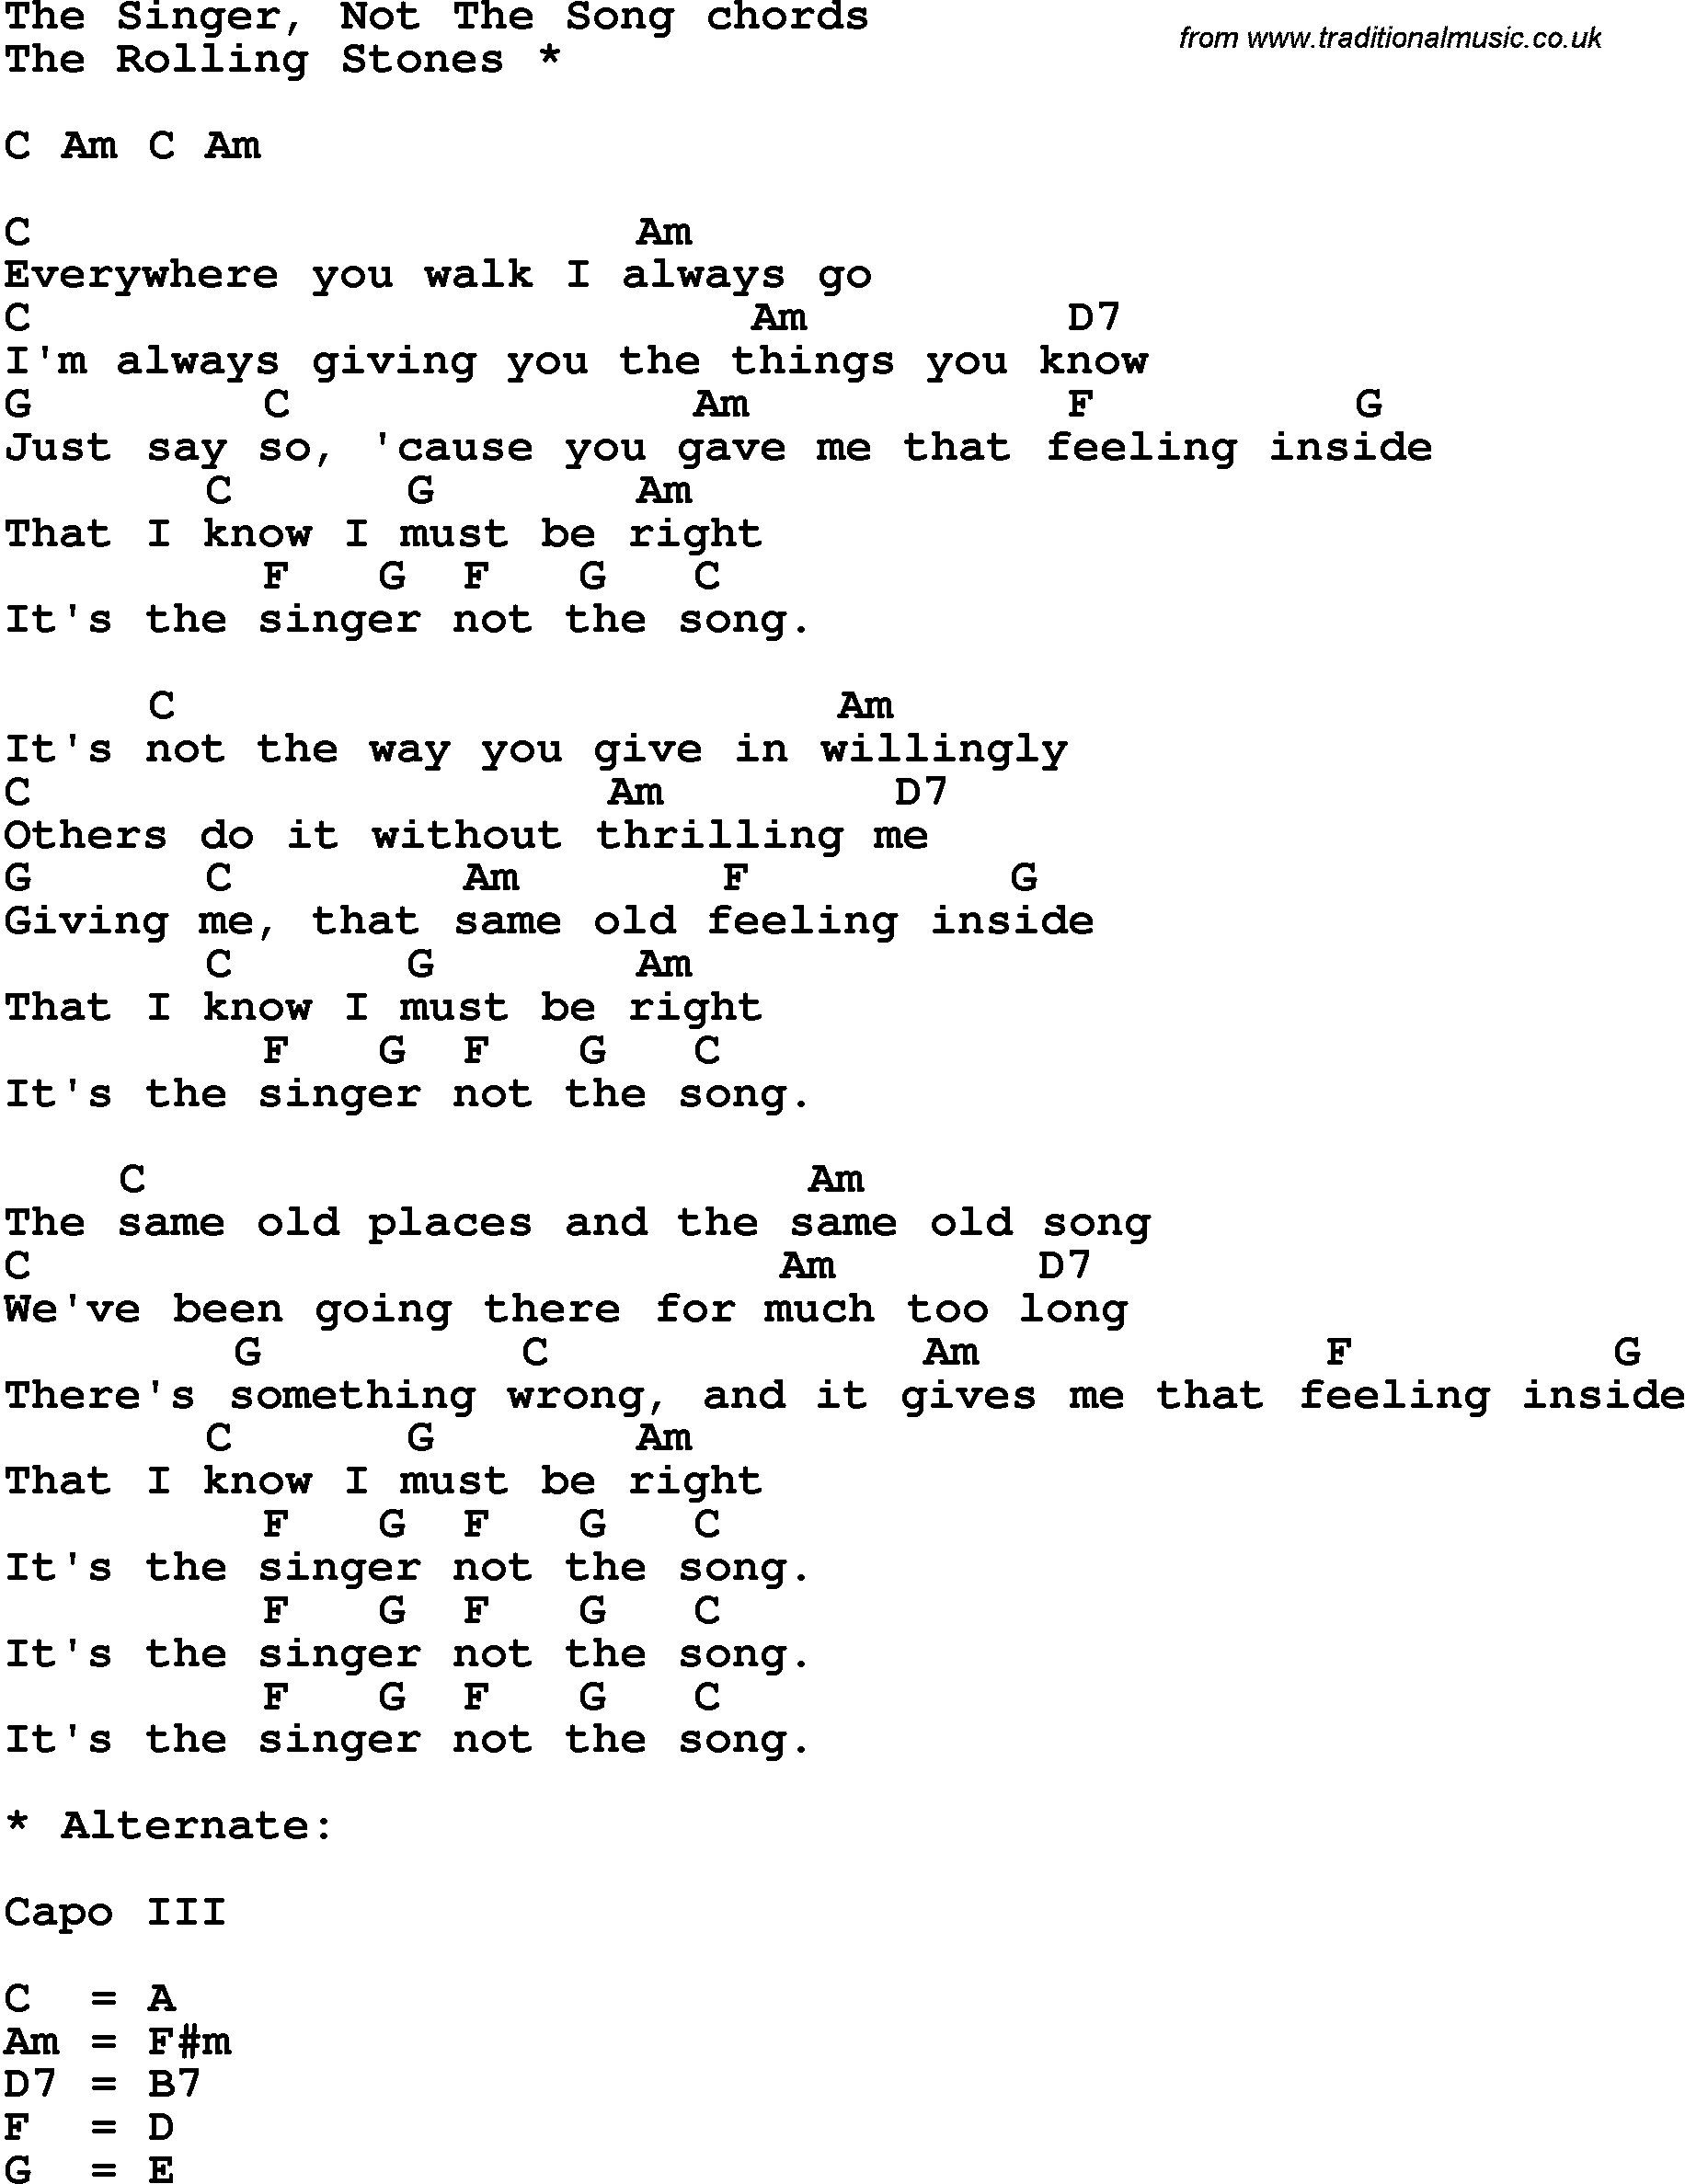 Song Lyrics with guitar chords for The Singer, Not The Song